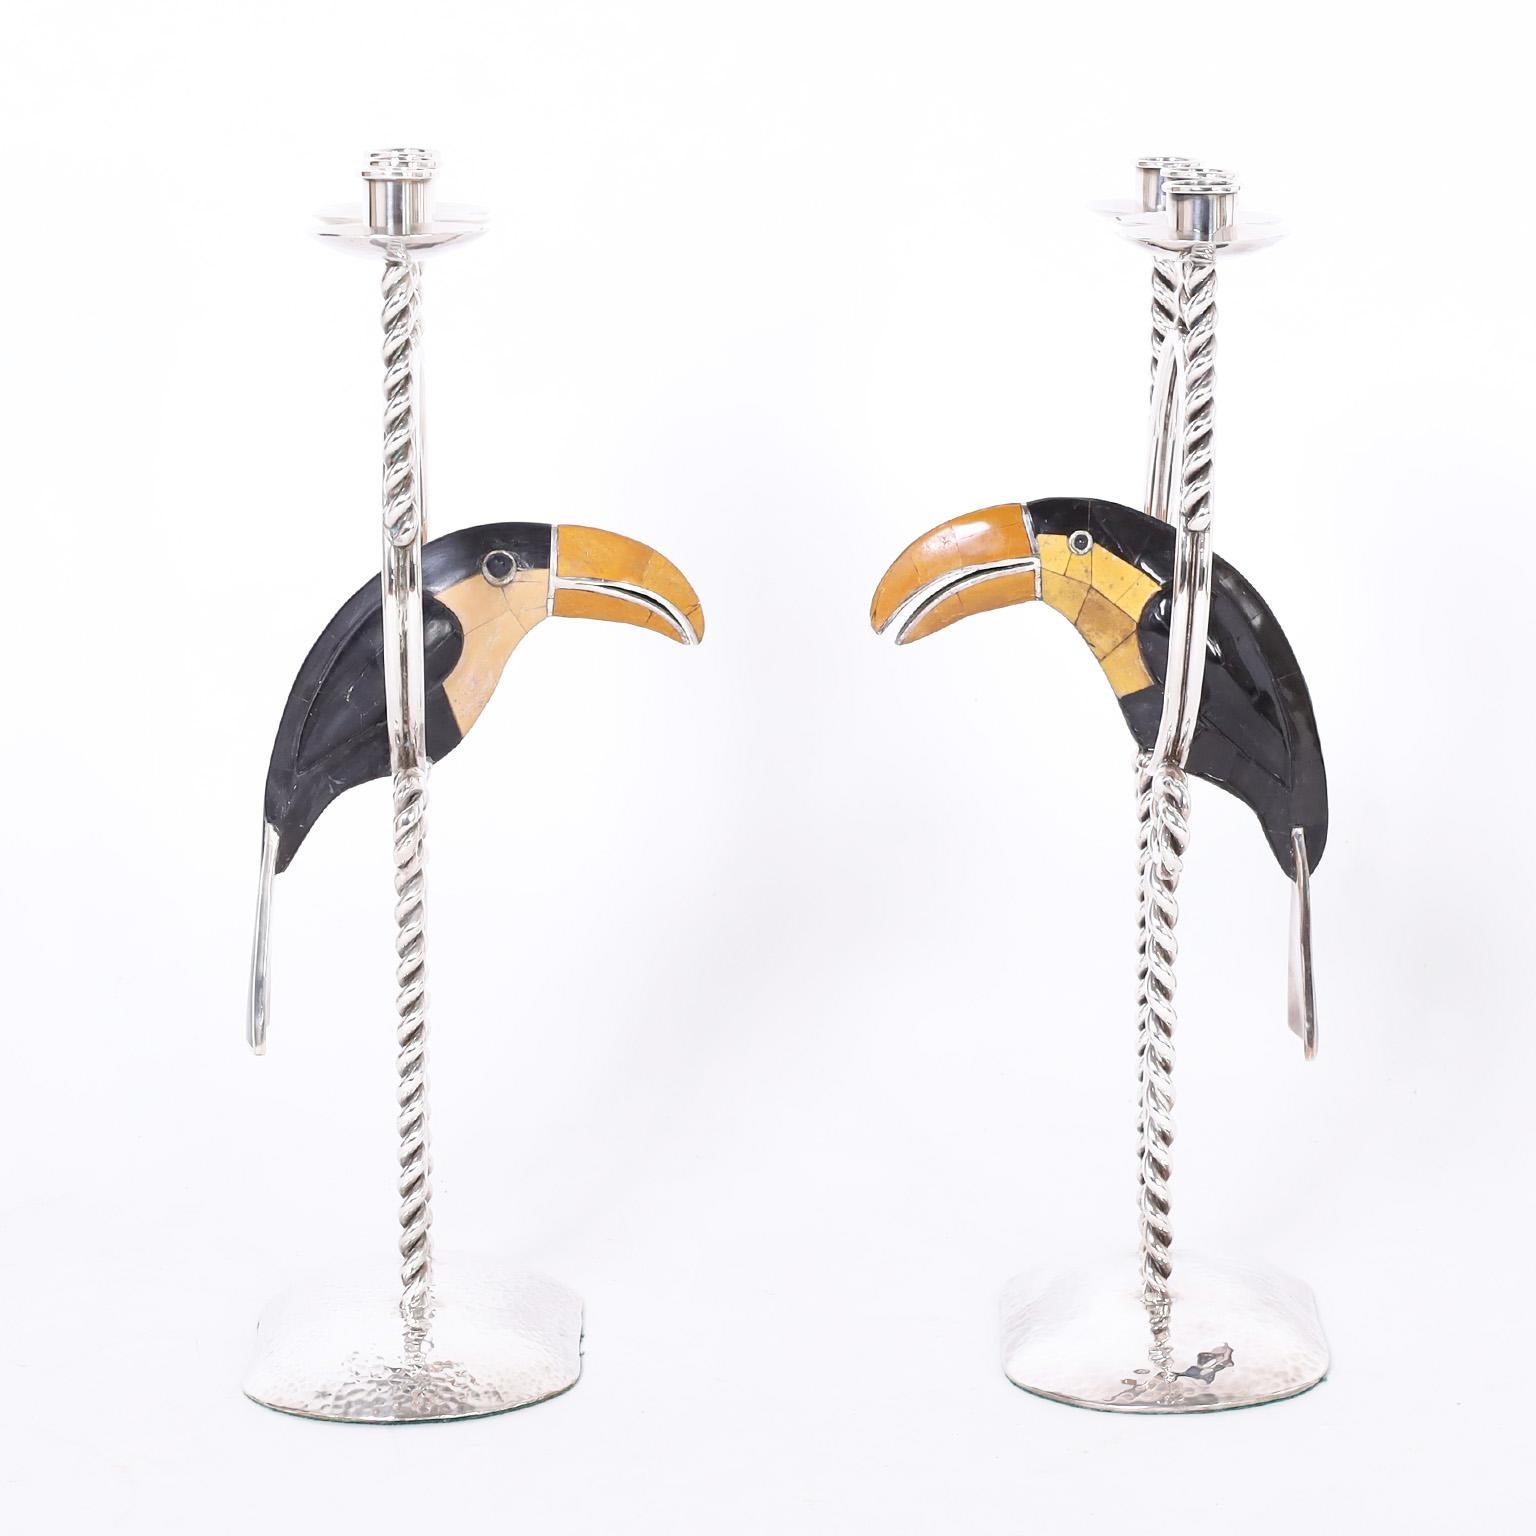 Standout pair of candelabras expertly handcrafted with silver plate on copper in an alluring modern design featuring stone clad toucans perched in the centers. Signed Emilia Castillo Mexico on the bottoms.